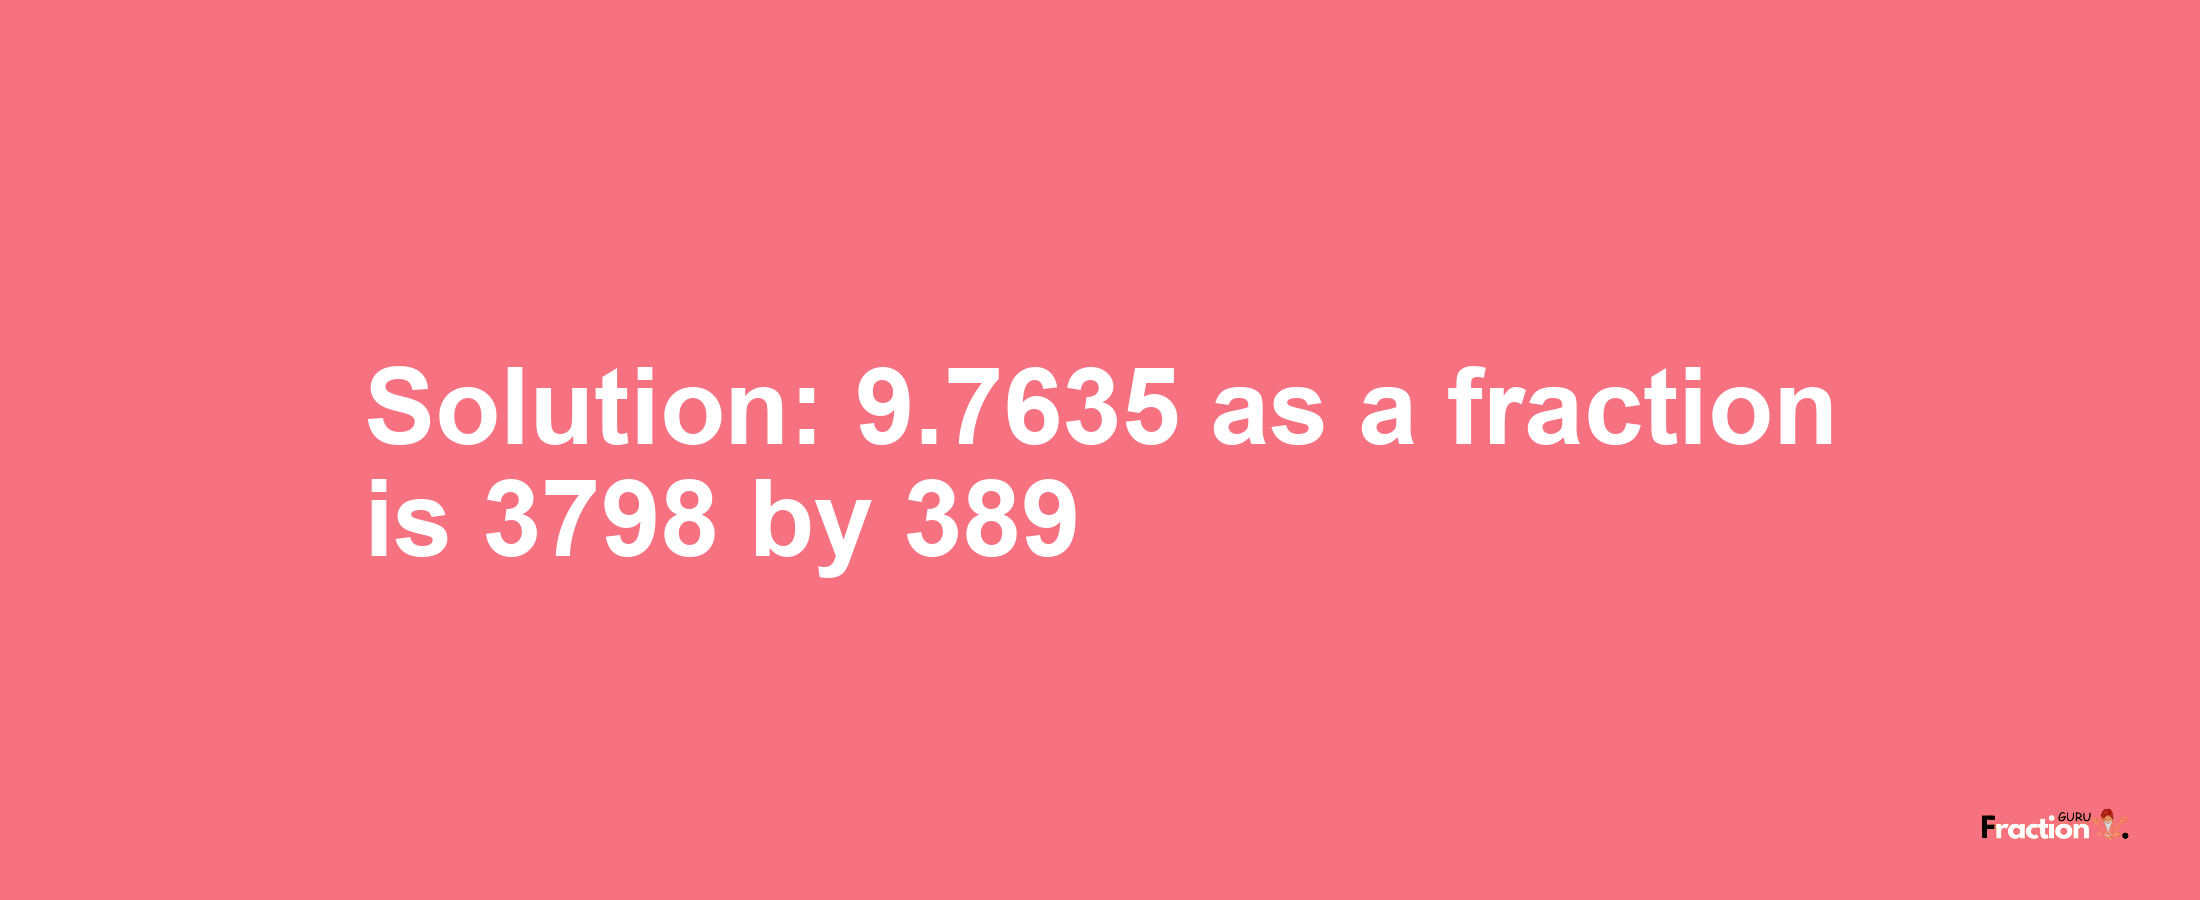 Solution:9.7635 as a fraction is 3798/389